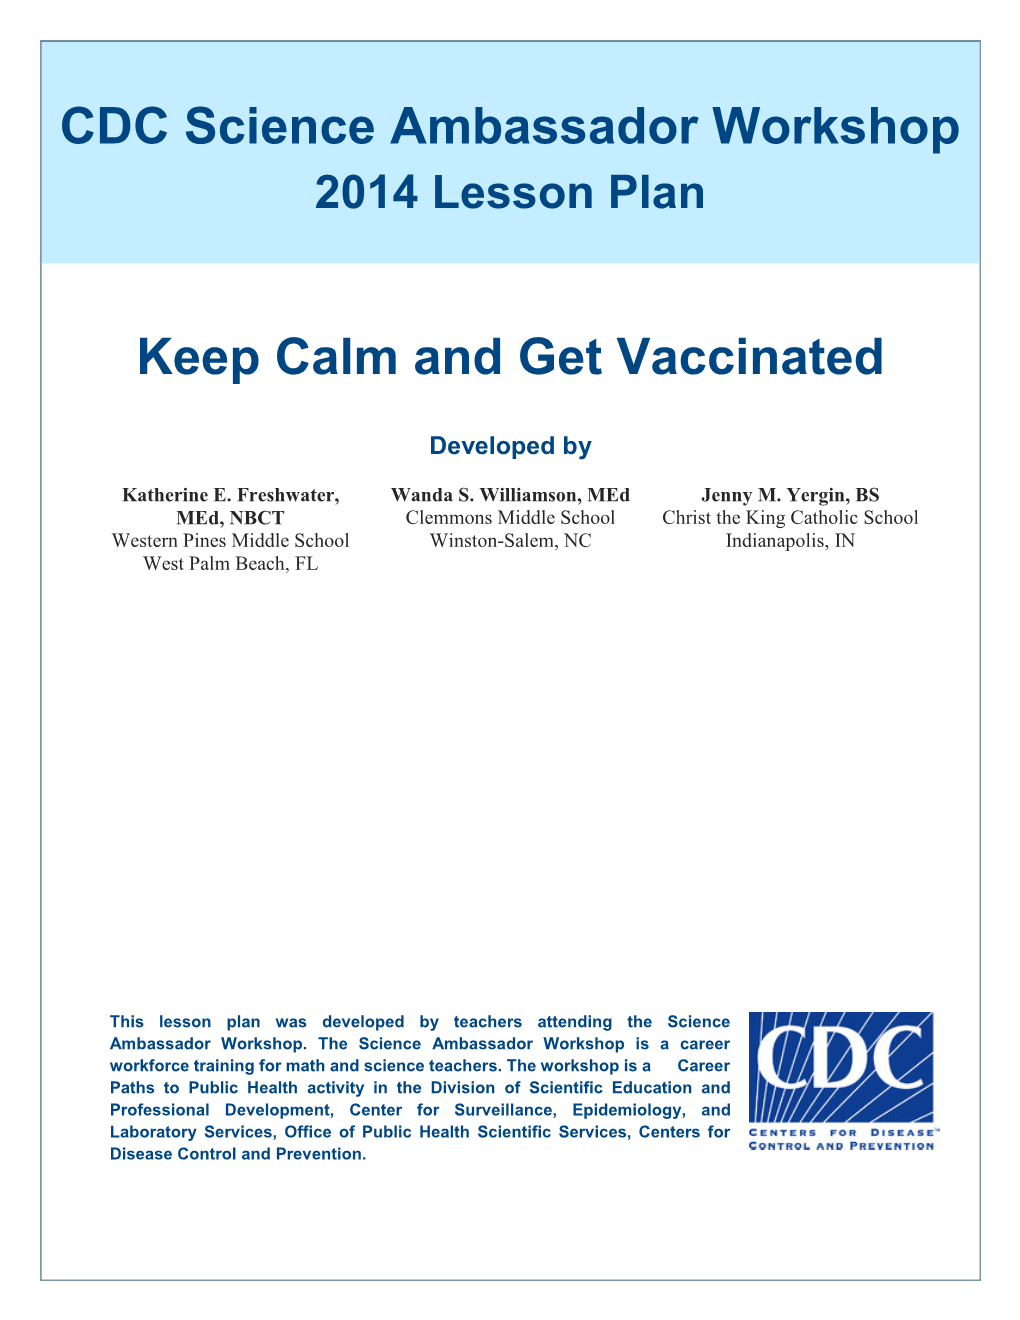 Keep Calm and Get Vaccinated